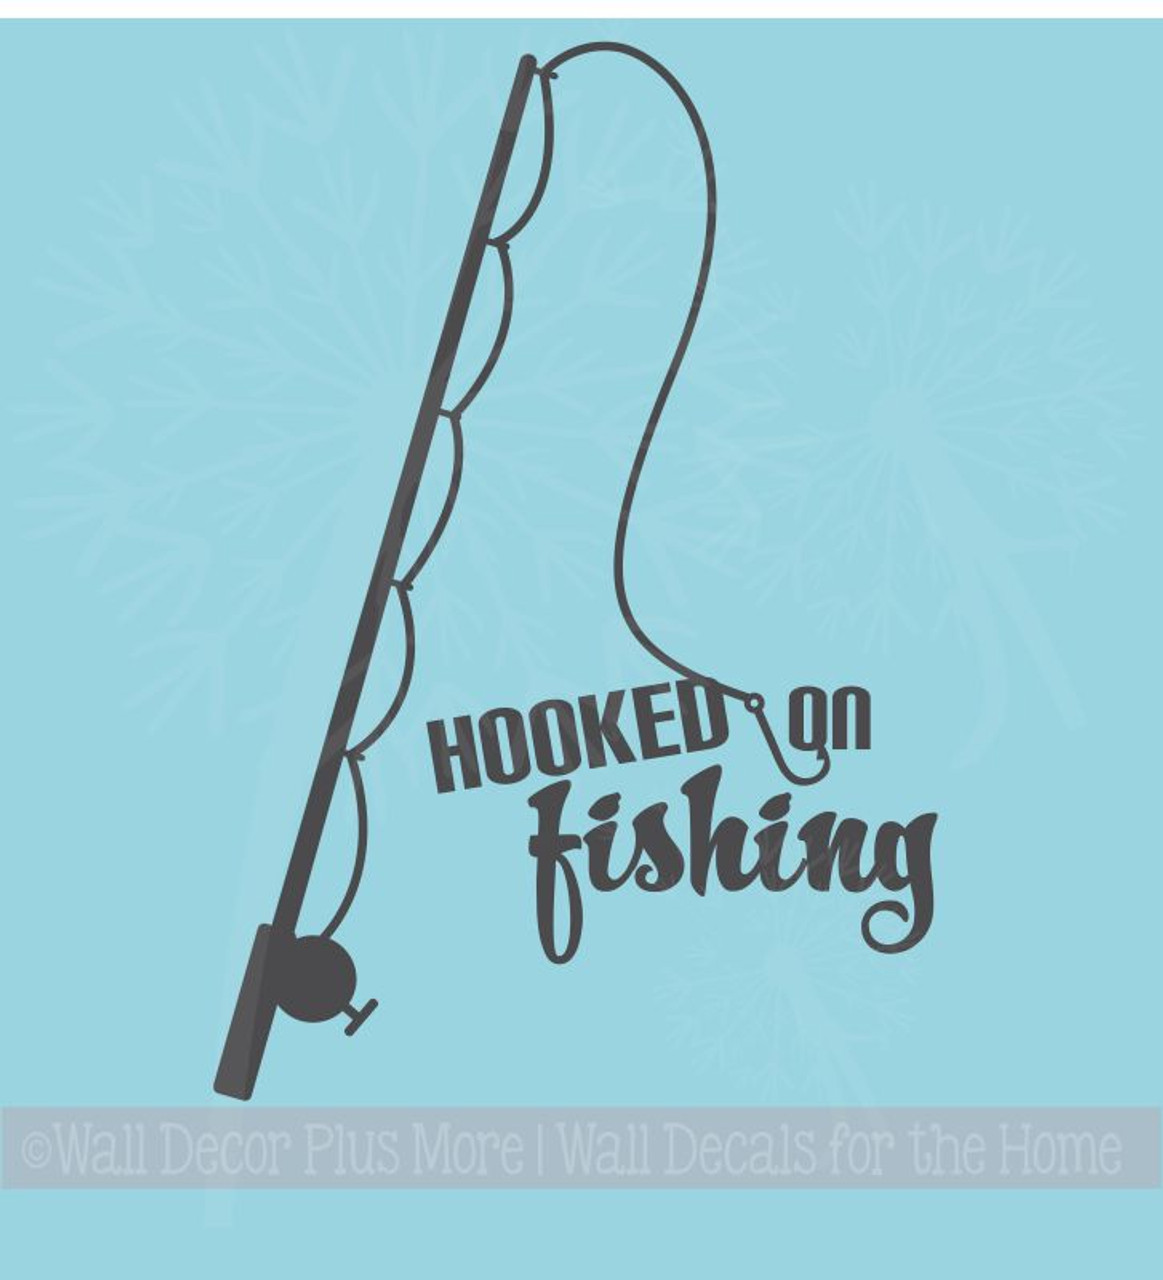 Hooked On Fishing Decal Sticker - HOOKED-ON-FISHING